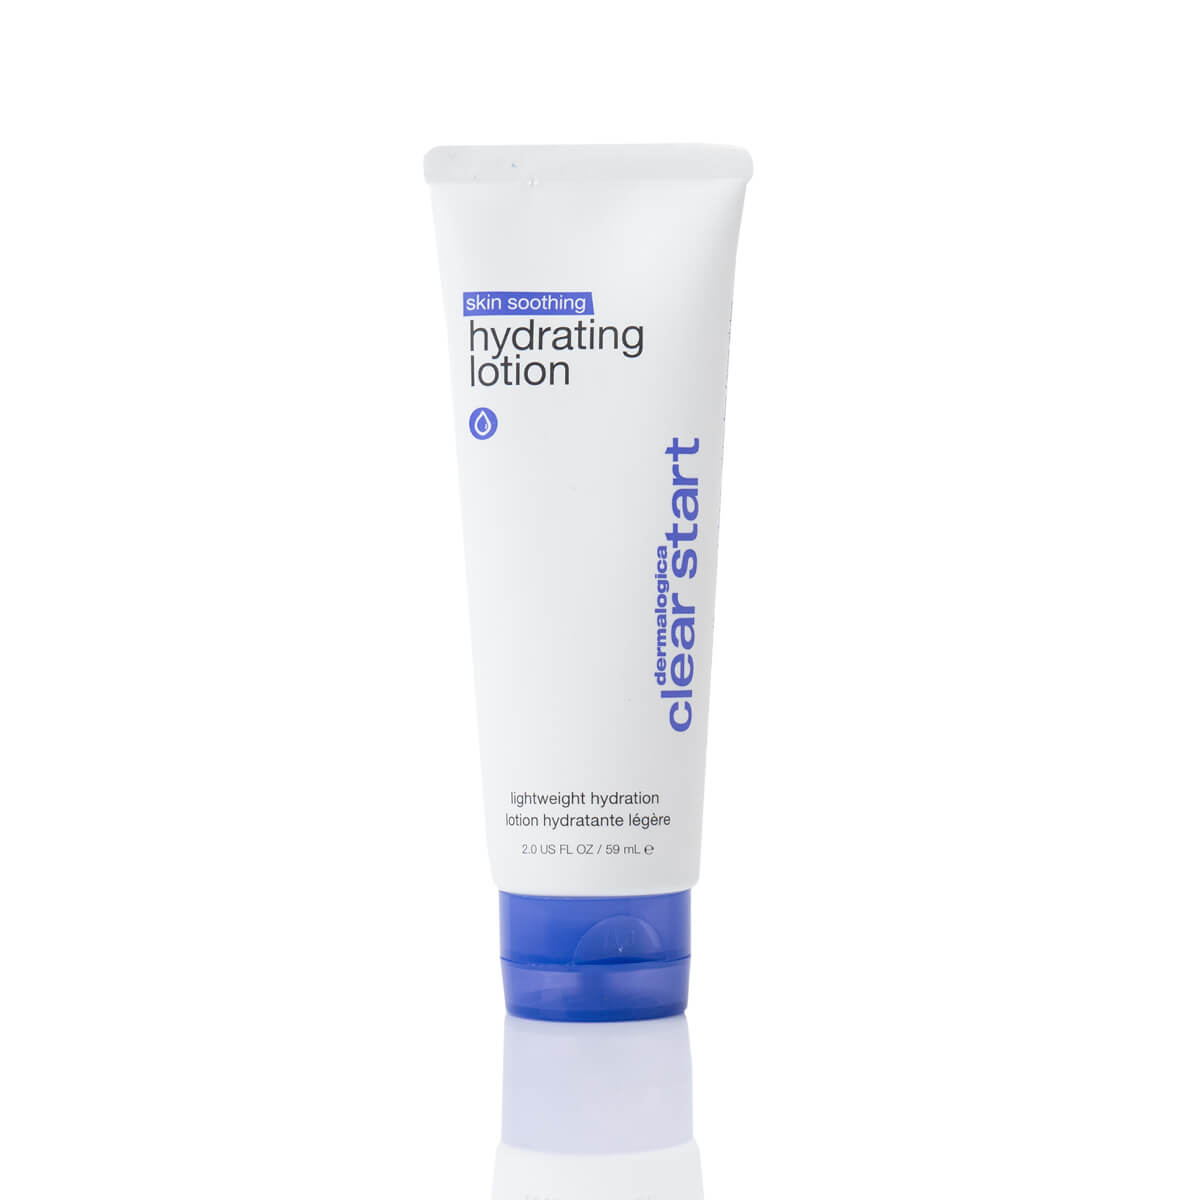 skin soothing hydrating lotion (60ml)